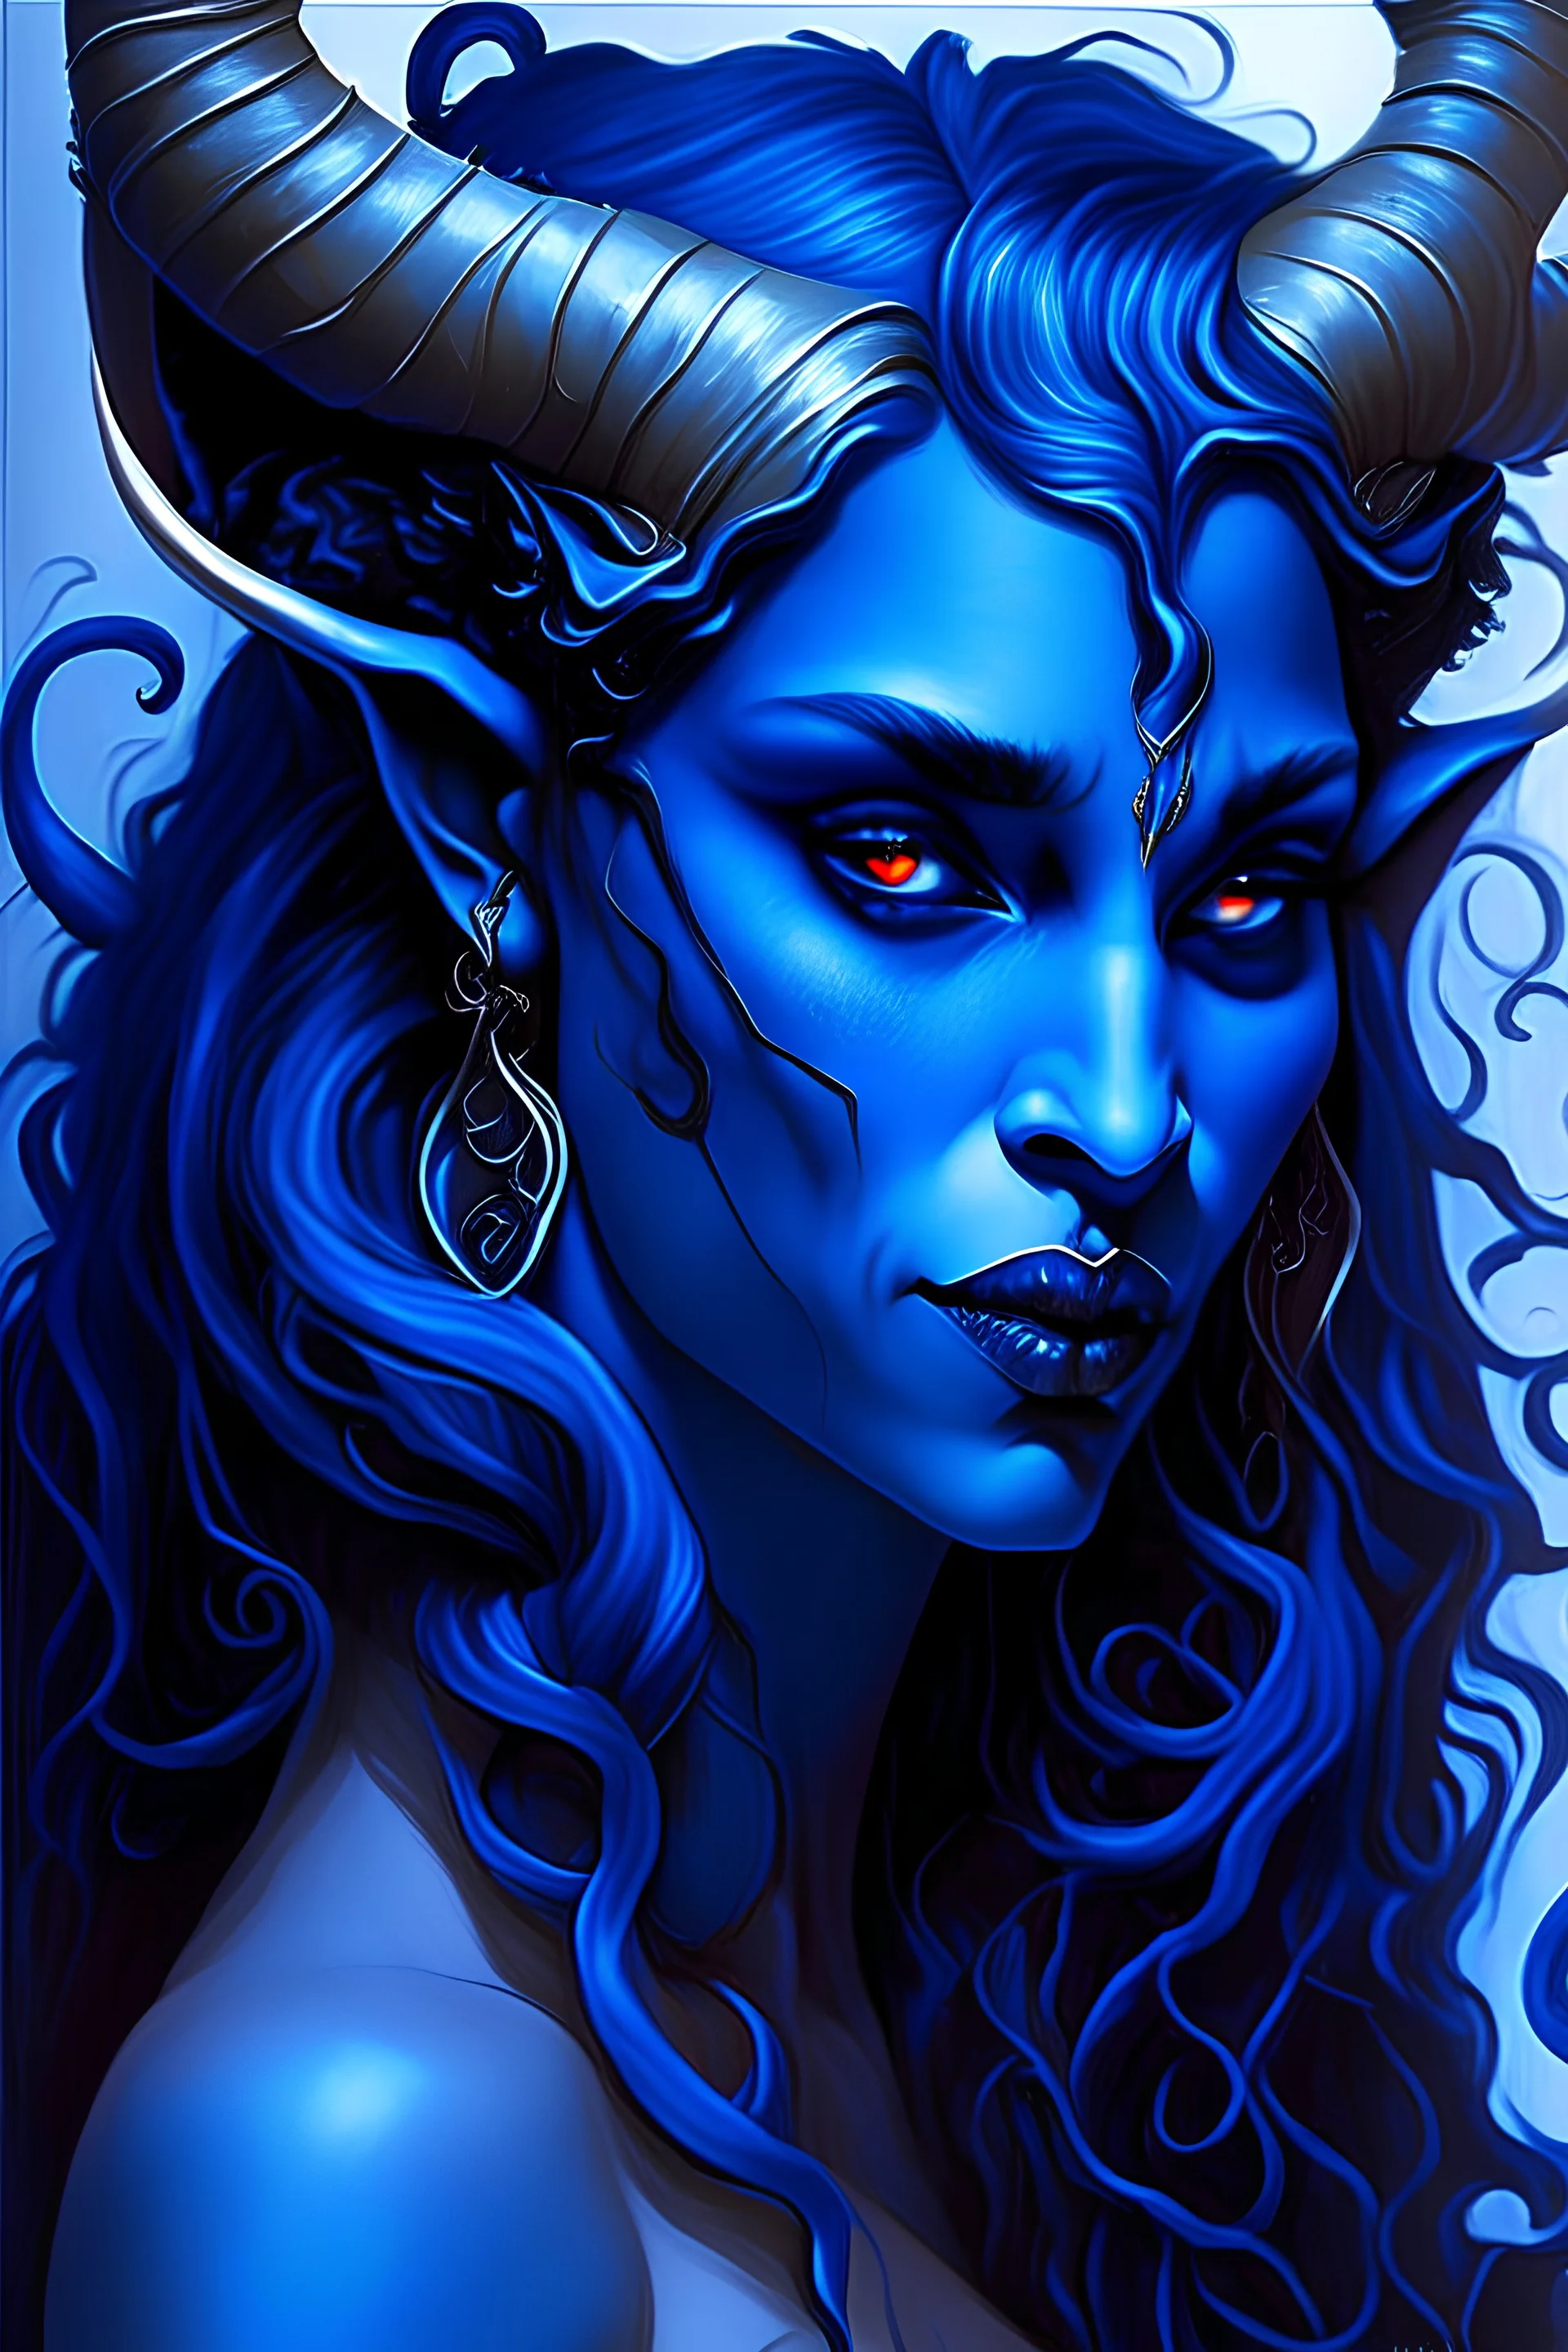 a captivating blue-skinned devil with elegant horns and allure beyond compare. Her seductive nature is represented through her enchanting voice, mesmerizing gaze, and irresistible charm. She has stunning blue skin that shimmers like a moonlit ocean. Her long, flowing hair cascades in midnight blue waves, framing her alluring face. Horns, elegantly curved like a crescent moon, adorn her forehead, adding an enigmatic charm to her appearance. Her eyes are deep pools of sapphire, holding a seductive